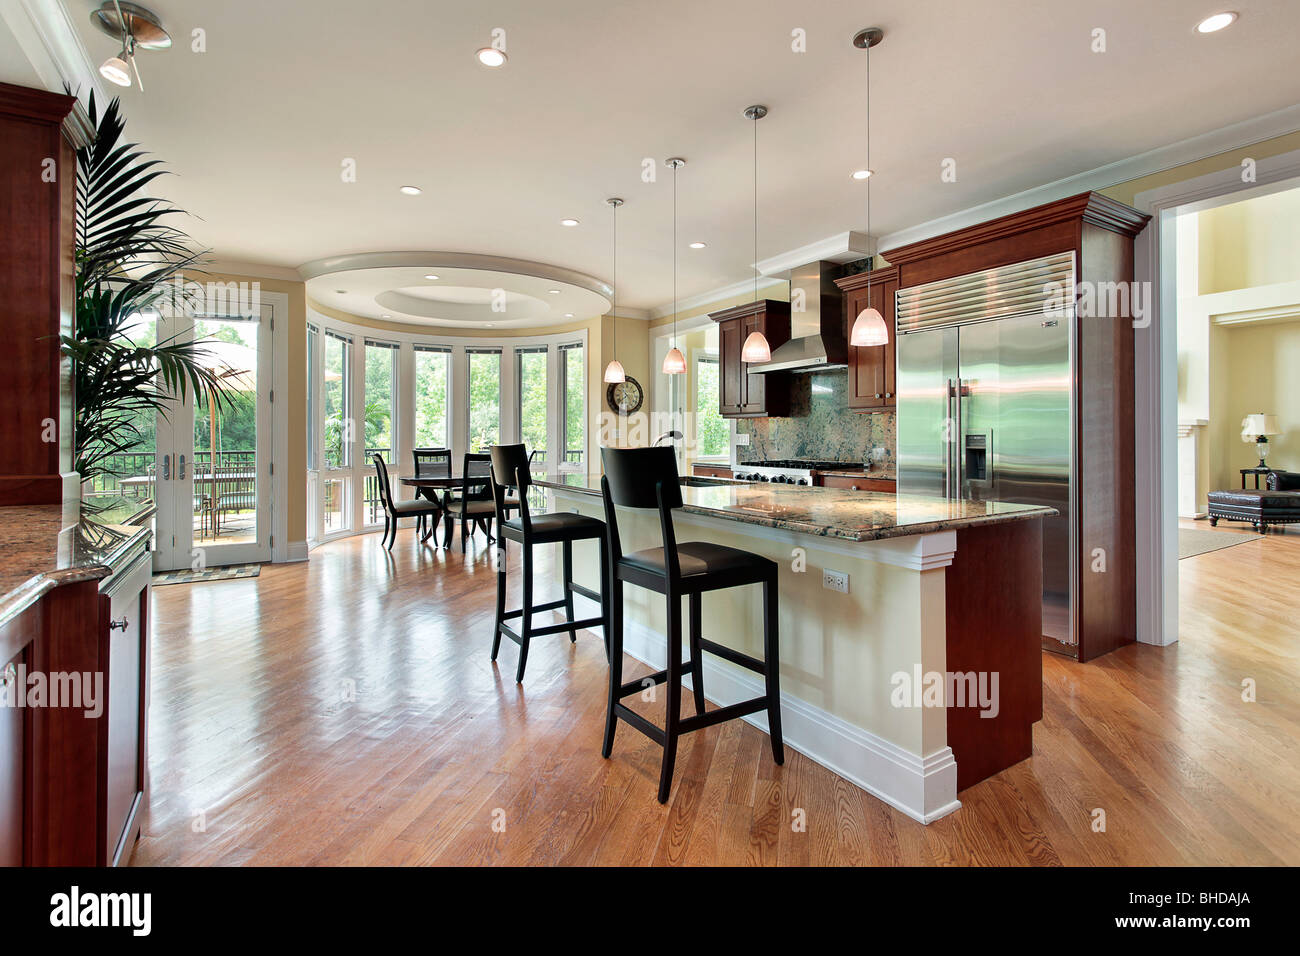 Kitchen in luxury home with curved eating area Stock Photo